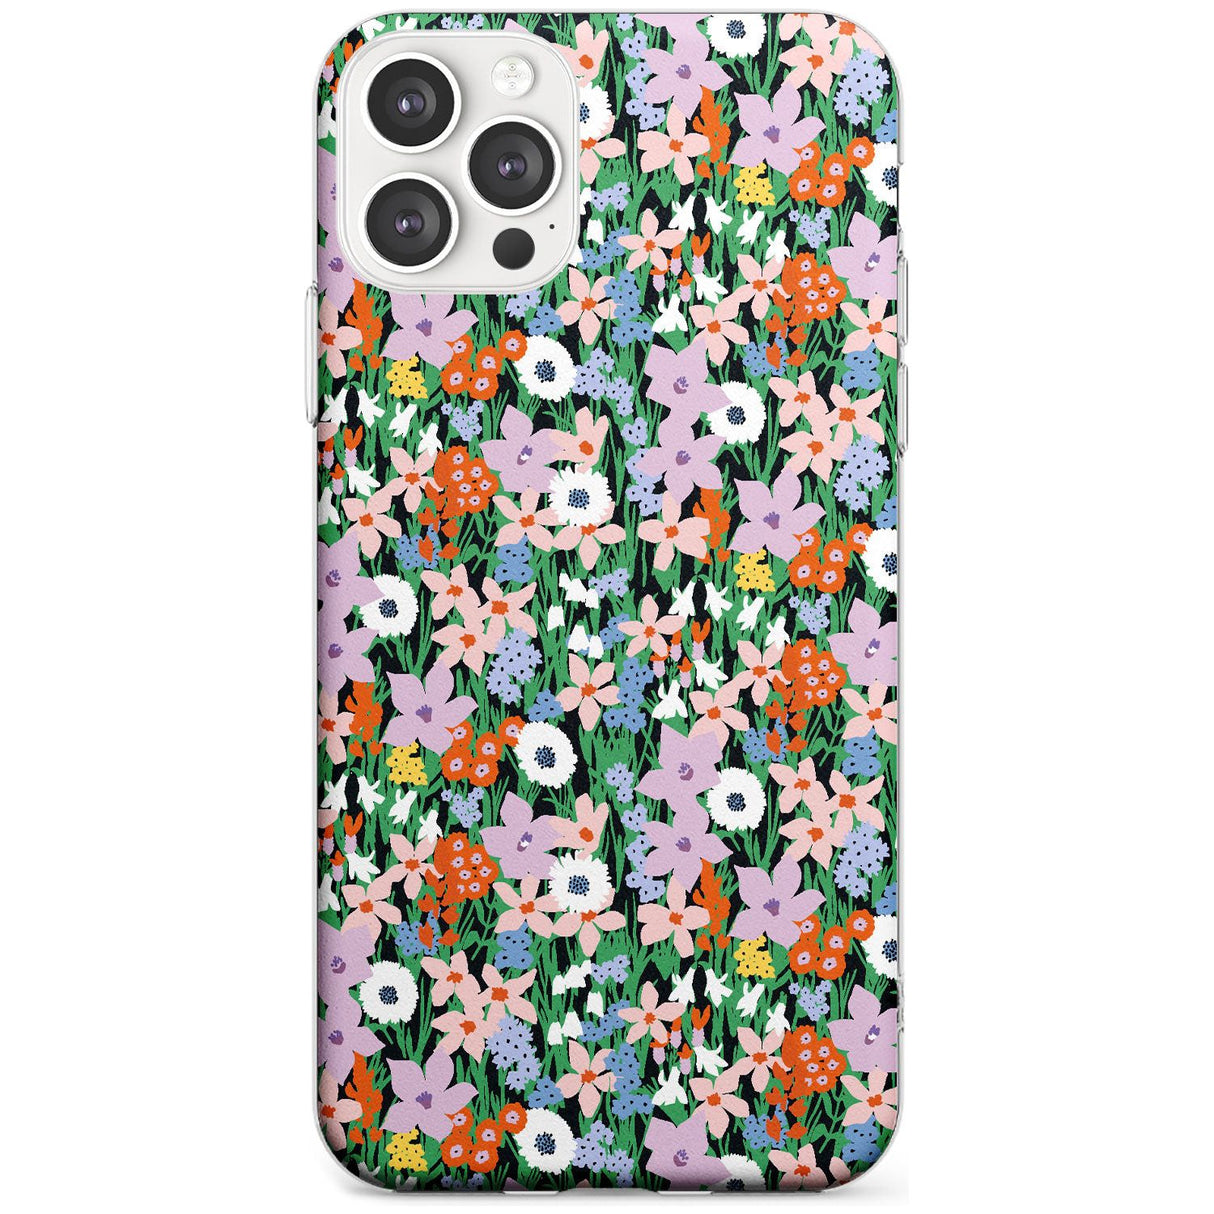 Jazzy Floral Mix: Solid Black Impact Phone Case for iPhone 11 Pro Max